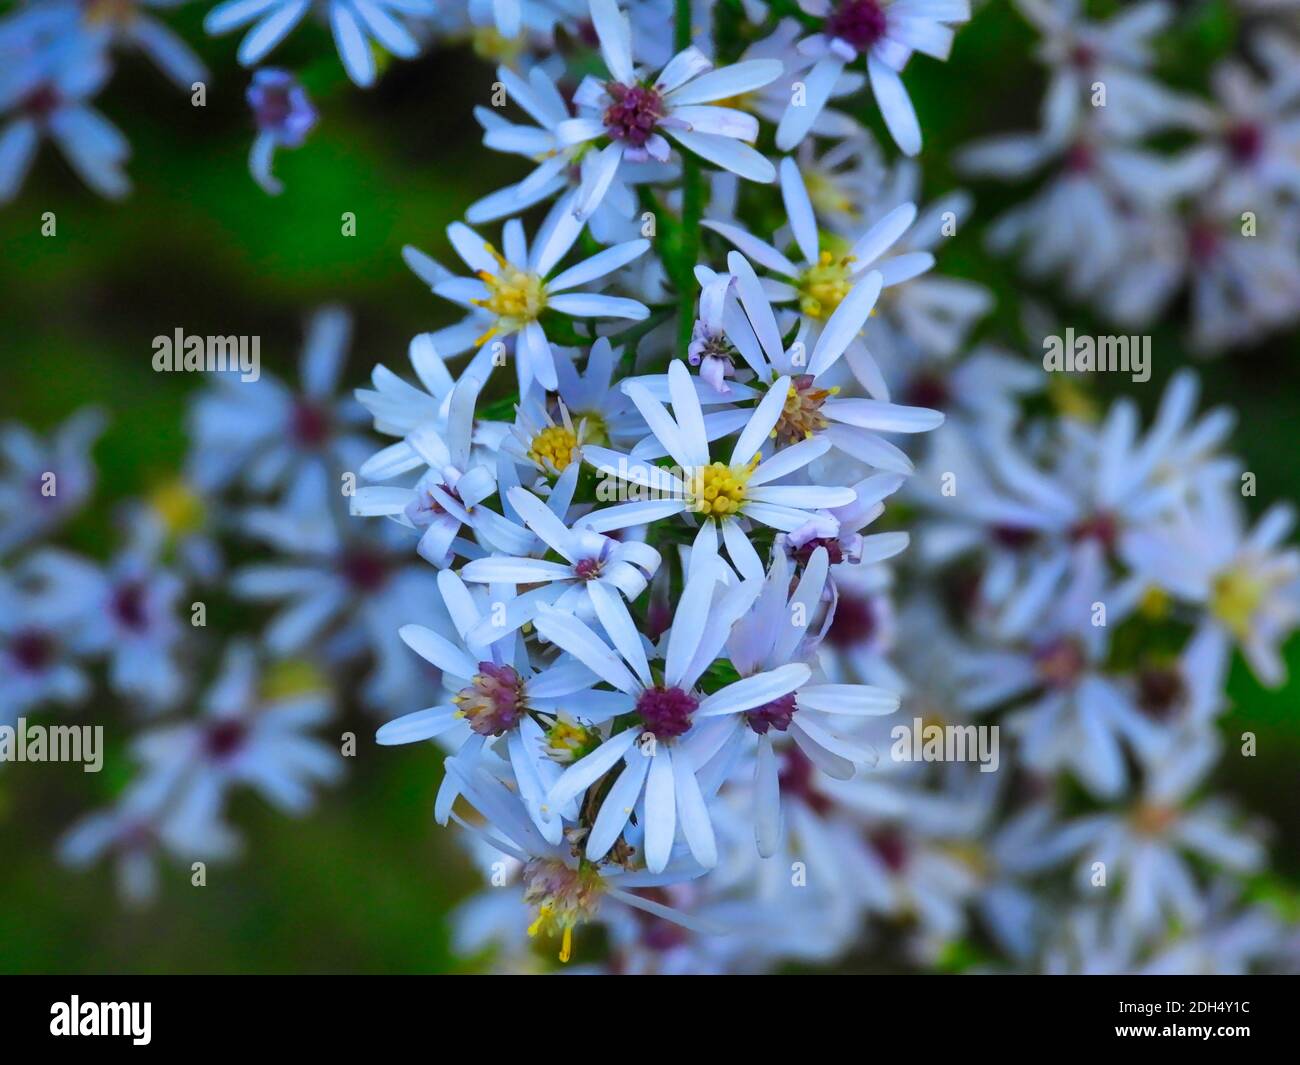 Blue aster flowers with white petals and both yellow and purple centers in closeup macro view of these beautiful flower blooms Stock Photo